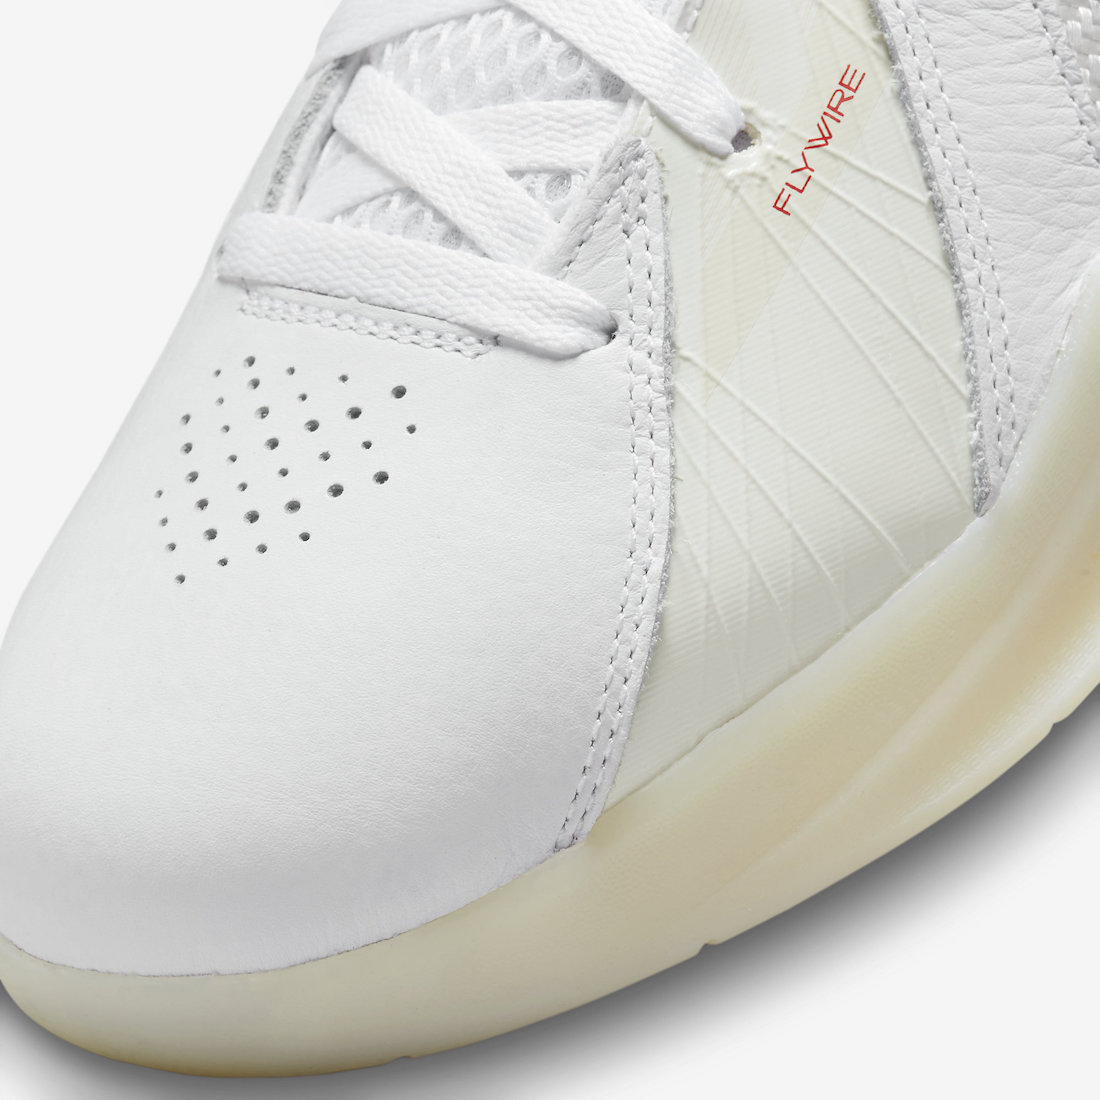 Nike KD 3 White Gold DZ3009-100 Release Date Flywire